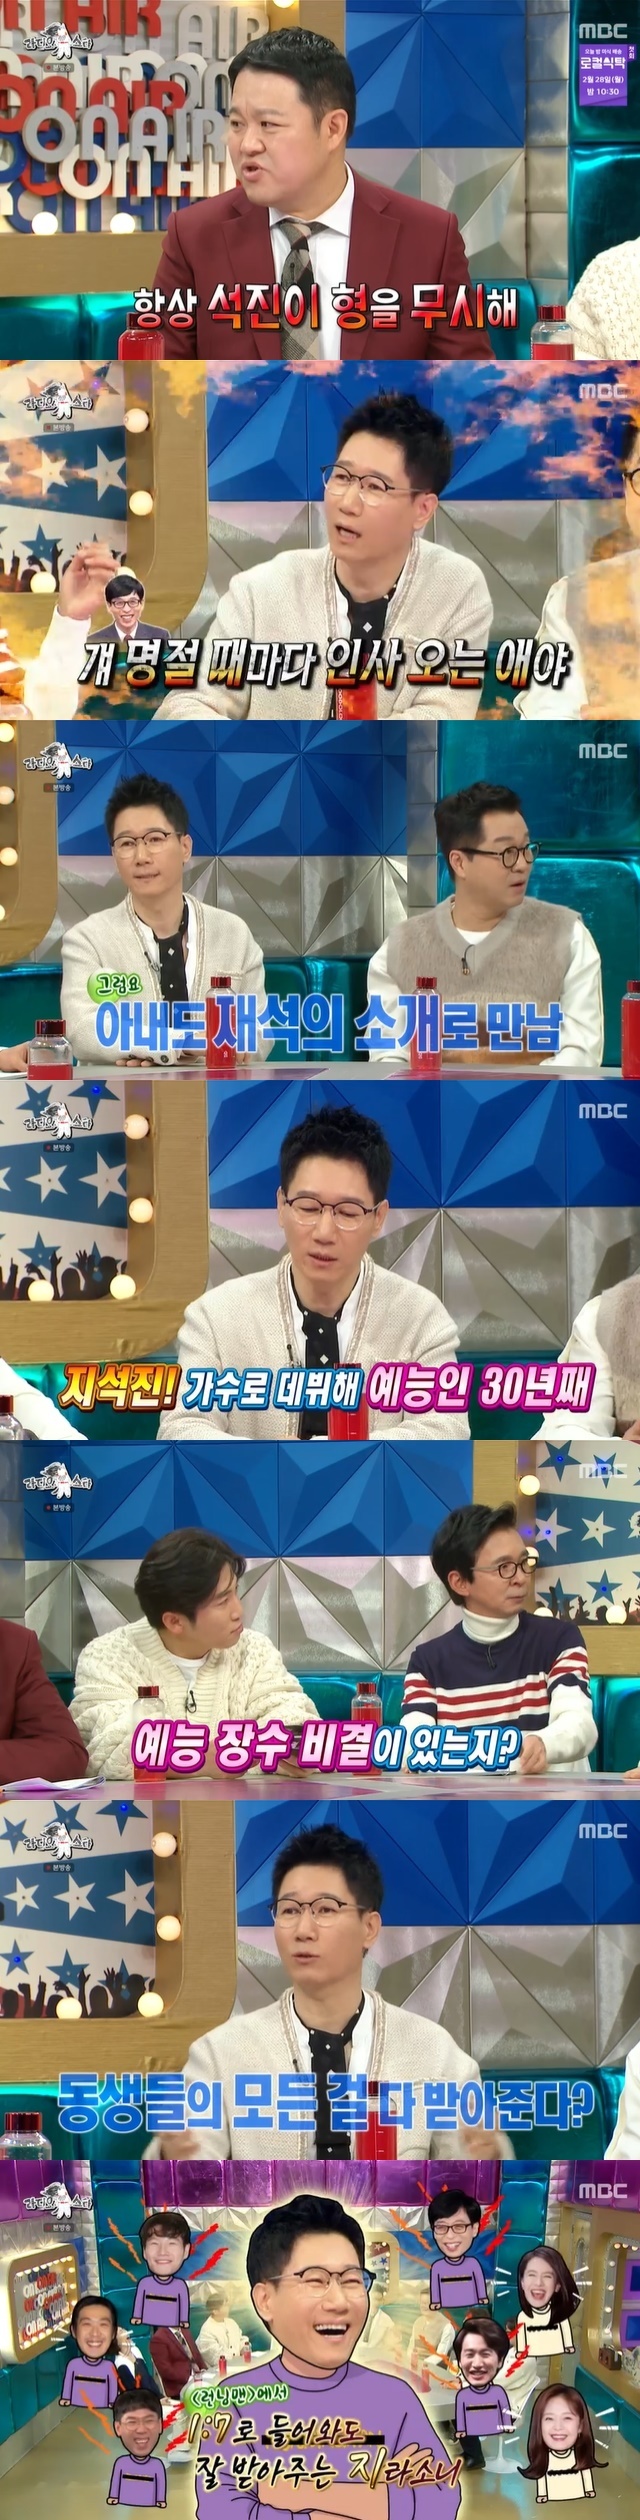 Ji Suk-jin actively refuted Gim Gu-ras claim that Yoo Jae-Suk ignores his brother.In the 758th episode of MBC entertainment Radio Star (hereinafter referred to as Radio Star), which was broadcast on February 23, Ji Suk-jin, Ji Sang-ryeol, Nam Chang-hee and Park Jae-jung appeared as guests for the feature N Years of Promising.Gim Gu-ra said, There is something I am not satisfied with Park Jae-seok, but Seokjin always ignores his brother.Ji Suk-jin was embarrassed to say, He is a person who greets me every holiday, but Gim Gu-ra continued, Yoo Jae-Suk is a very nice girl, but when I say Adlib is accompanied, I was so heartbroken.Ji Suk-jin said, I do not understand the humor. It is a funny child. He said, Do not be treated like this here.So does the production team for Radio Star.Sometimes I used it, but when I got an empty seat (Yoo Se-yoon), I should put it in and do it. Ji Suk-jin puzzled Ji Sang-ryeol, who asked purely, Did not you do it then? when Ji Sang-ryeol said he had once filled the vacancy.Ji Sang-ryeol hastily excused himself, saying: I have saved my own life; I have done nothing wrong.Ji Suk-jins Yoo Jae-Suk talk continued.Earlier, a comment that said he would save Yoo Jae-Suk if his wife and Yoo Jae-Suk fell into the water was on the topic; Ji Suk-jin said, Oh, its different and its different.My wife said she was good at swimming. MCs asked an anomalous question: Who do you think Yoo Jae-Suk will save if Ji Suk-jin and Haha fall into the water at the same time?Ji Suk-jin, who hesitated to answer, asked if Gim Gu-ra was confident, and replied, I do not want to burden him to save me first. He showed deep affection for Yoo Jae-Suk.Ji Sang-ryeol laughed at the side, saying, Seokjin is more alive than Haha, so it is not bad to send it first.Ji Suk-jin said, Its been a long time, our wife has also been introduced by Park Jae-seok, MCs asked how long she had a relationship with Yoo Jae-suk.Ji Suk-jin said he was at first sight against his wife, who was originally a stylist, adding: I was surprised when I first came in and was so pretty and stylish, I was in a fantasy before I knew my personality.However, Ji Suk-jin asked her current wife about her relationship and said, It is very good, I still think it is very beautiful compared to my age, in my eyes.On the other hand, Nam Chang-hee insisted that he was a sexual organ line.Nam Chang-hee said, Yoo Jae-Suk broadcast the 30th anniversary in Yuquiz, and then Seokjin went out and I went out.At this time, Ji Suk-jin said, Is not it self-esteem? You are you. What line is it? And Nam Chang-hee did not die and said, You lived like that.My brother is my role model. Ji Suk-jin claimed that he is my brother, I am not the style under whom; Nam Chang-hee told Ji Suk-jin, My brother is not under whom.Whose back is it? said Ji Sang-ryeol, while Ji Sang-ryeol, I never got on the line with my brother.I will clean my house. Ji Suk-jin knew that he was a sniper, but he said, Who are you talking about? 